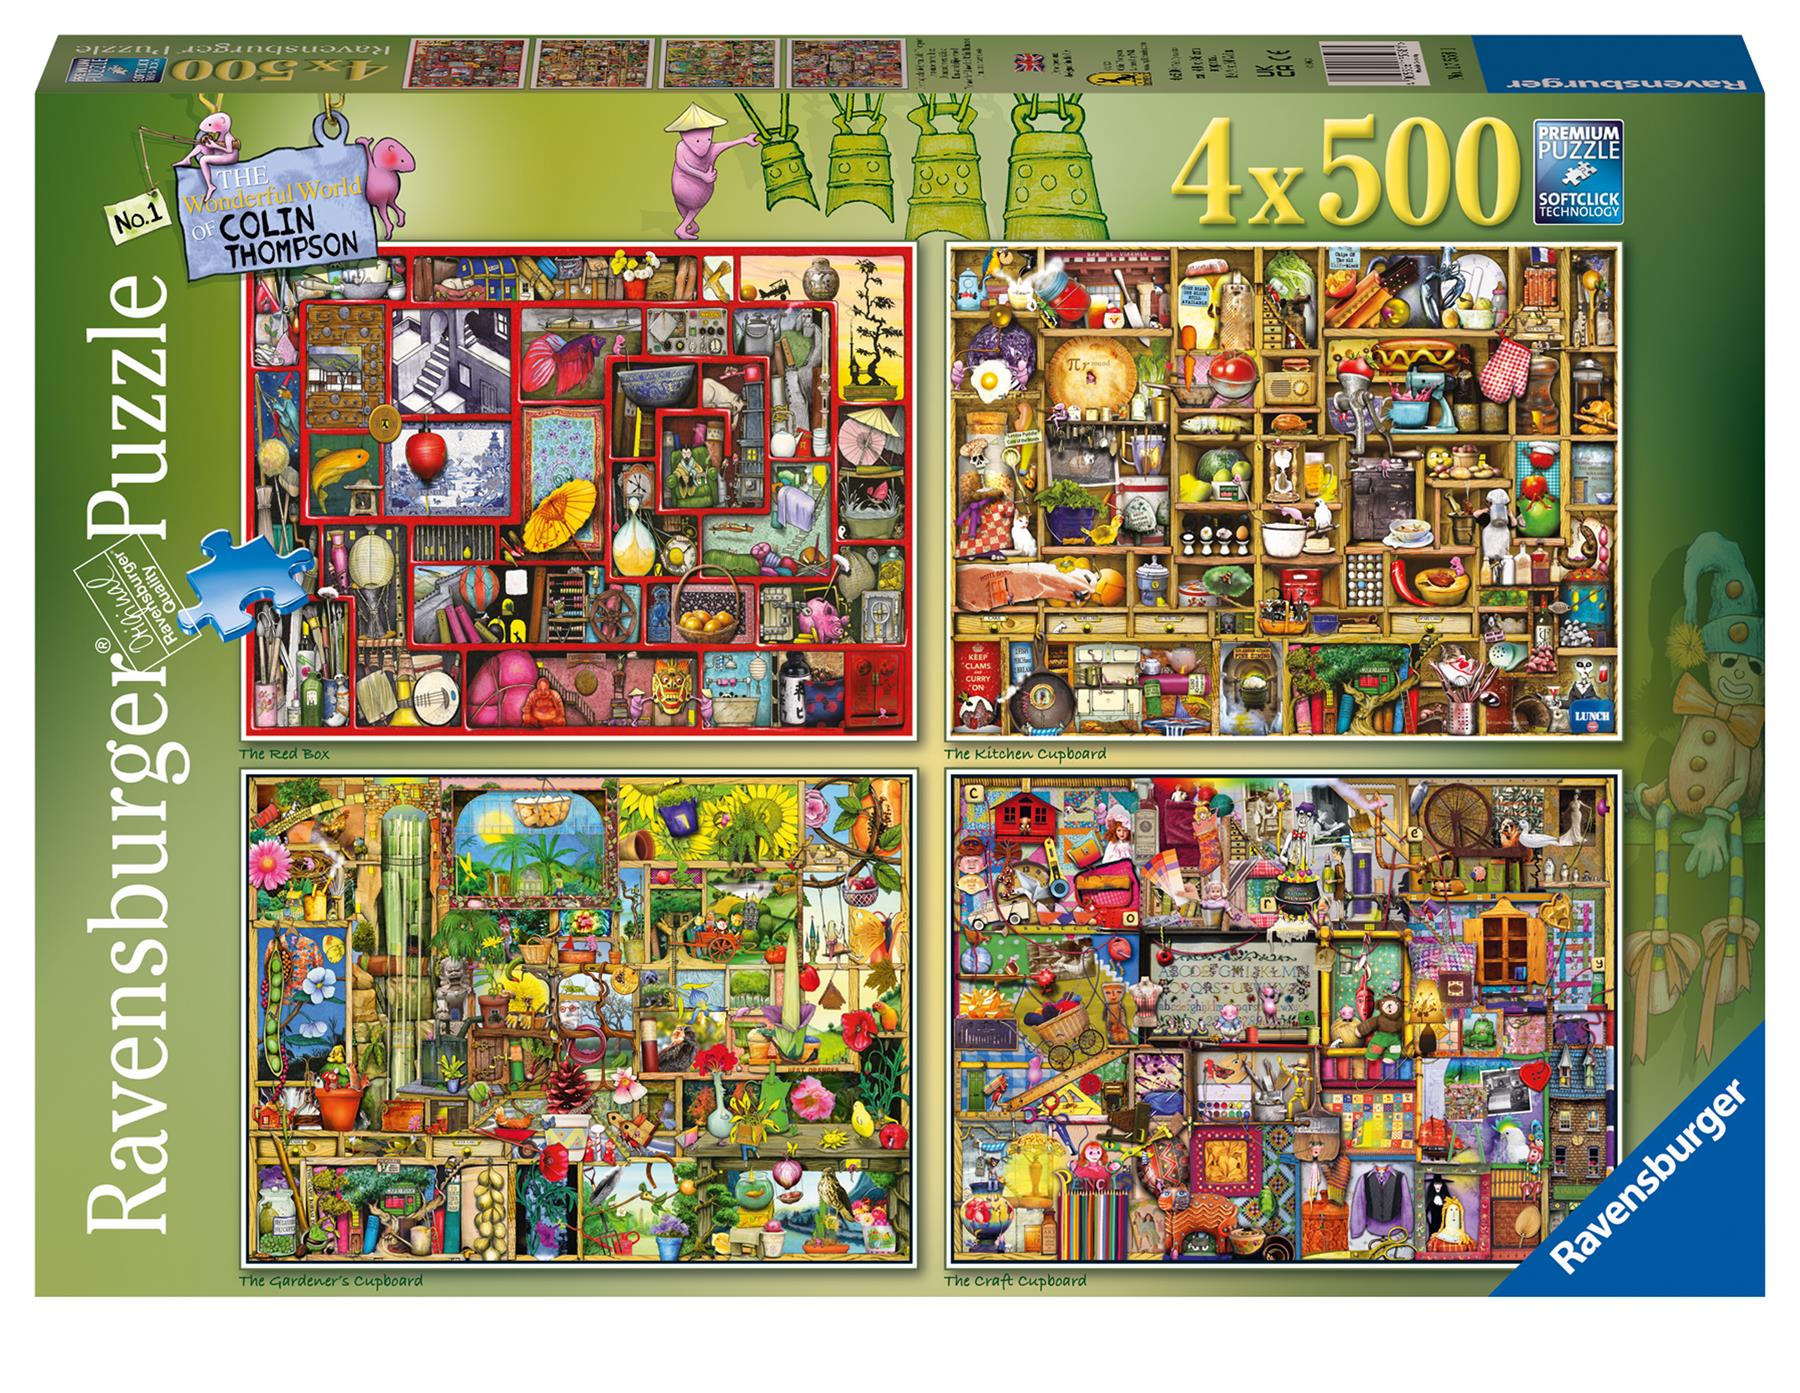 Ravensburger Classic Disney Puzzles for Adults and Children Aged 10 Years  Up - 2 x 500 Pieces [ Exclusive]